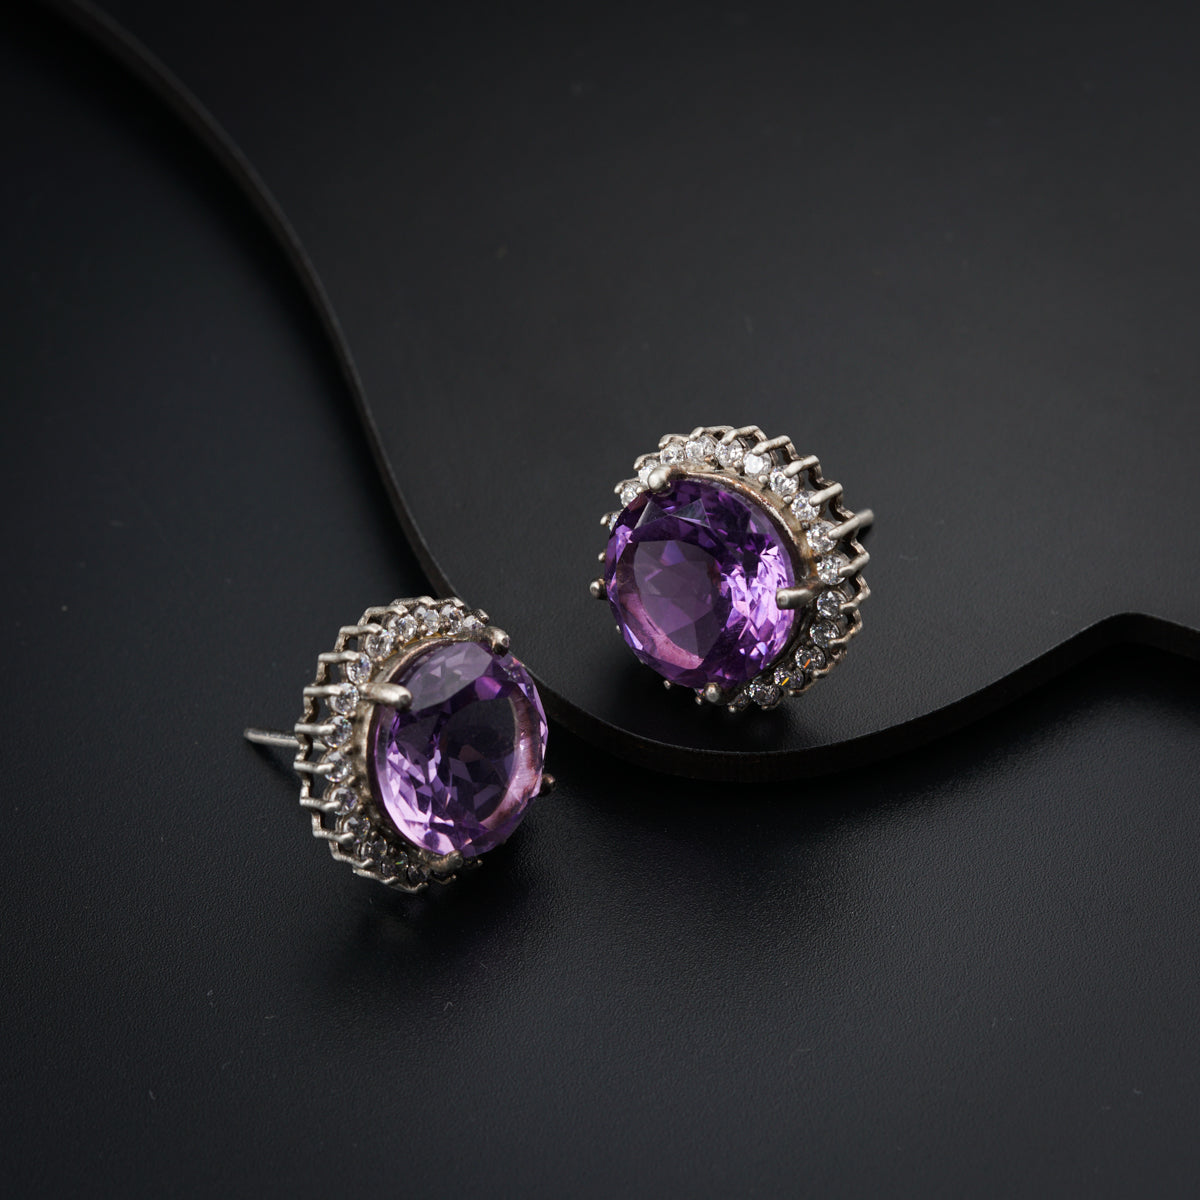 a pair of earrings with amethyst colored stones